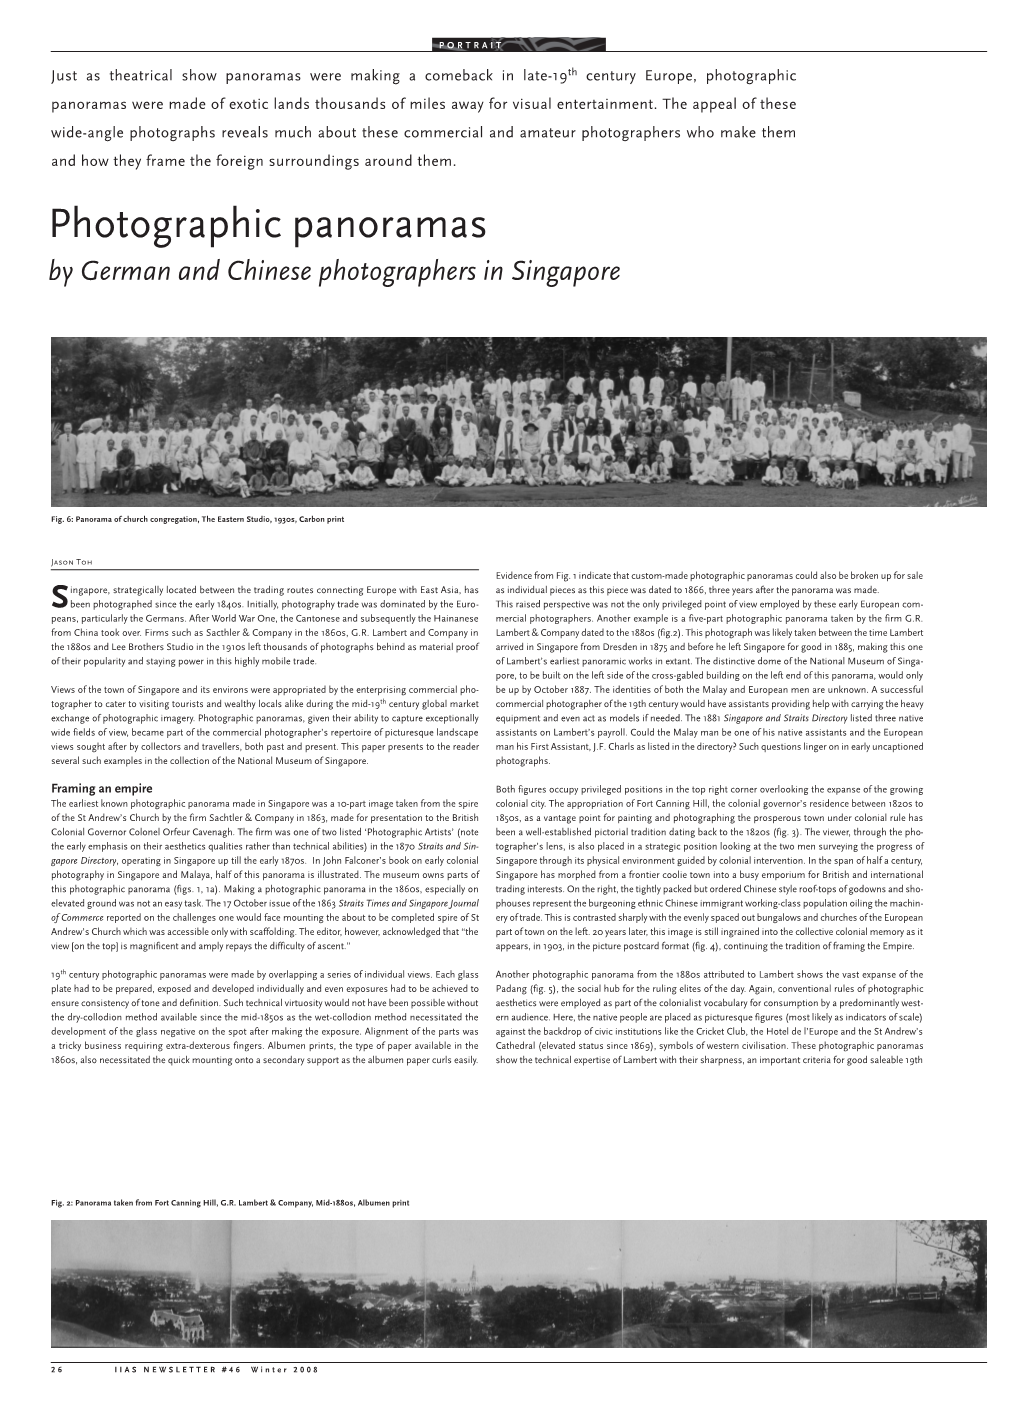 Photographic Panoramas Were Made of Exotic Lands Thousands of Miles Away for Visual Entertainment